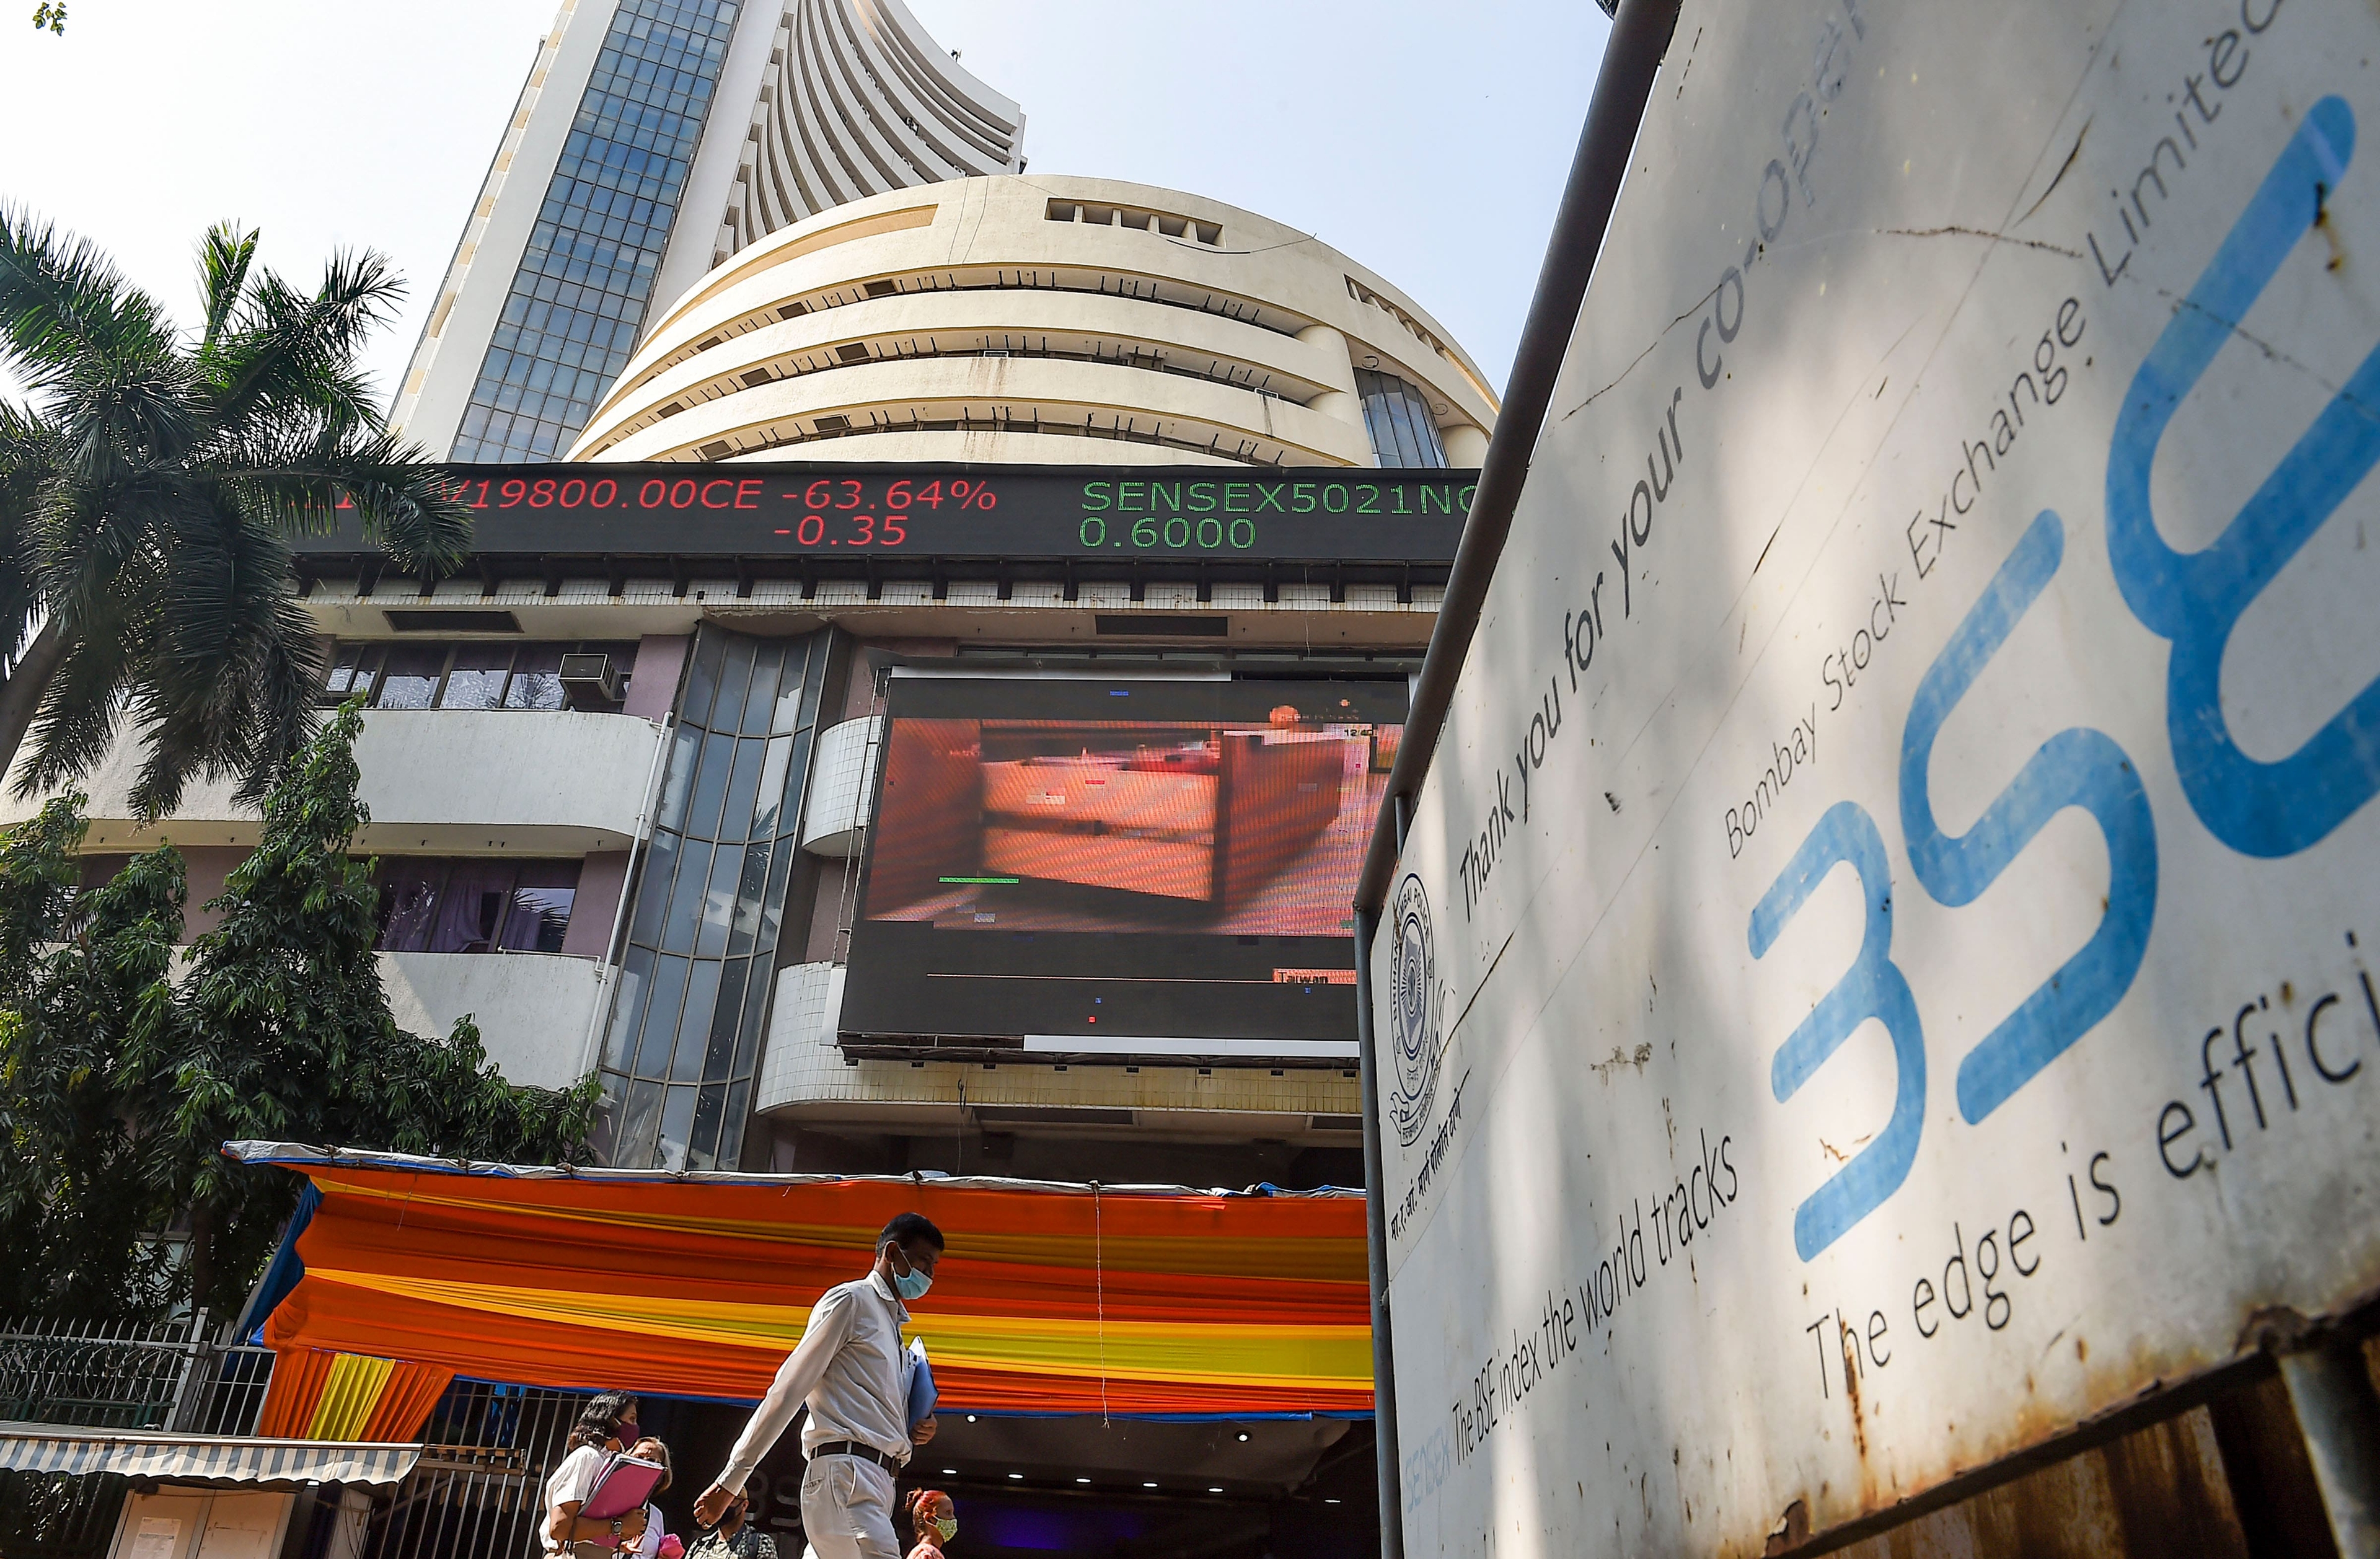 Frontline indices the Sensex and the Nifty ended in the red for the third consecutive session on April 13 as investors remained cautious over rising inflation and commodity prices and their impact on the earnings of corporates. Sensex closed 237 points, or 0.41 percent, down at 58,338.93 while the Nifty settled 55 points, or 0.31 percent, lower at 17,475.65.